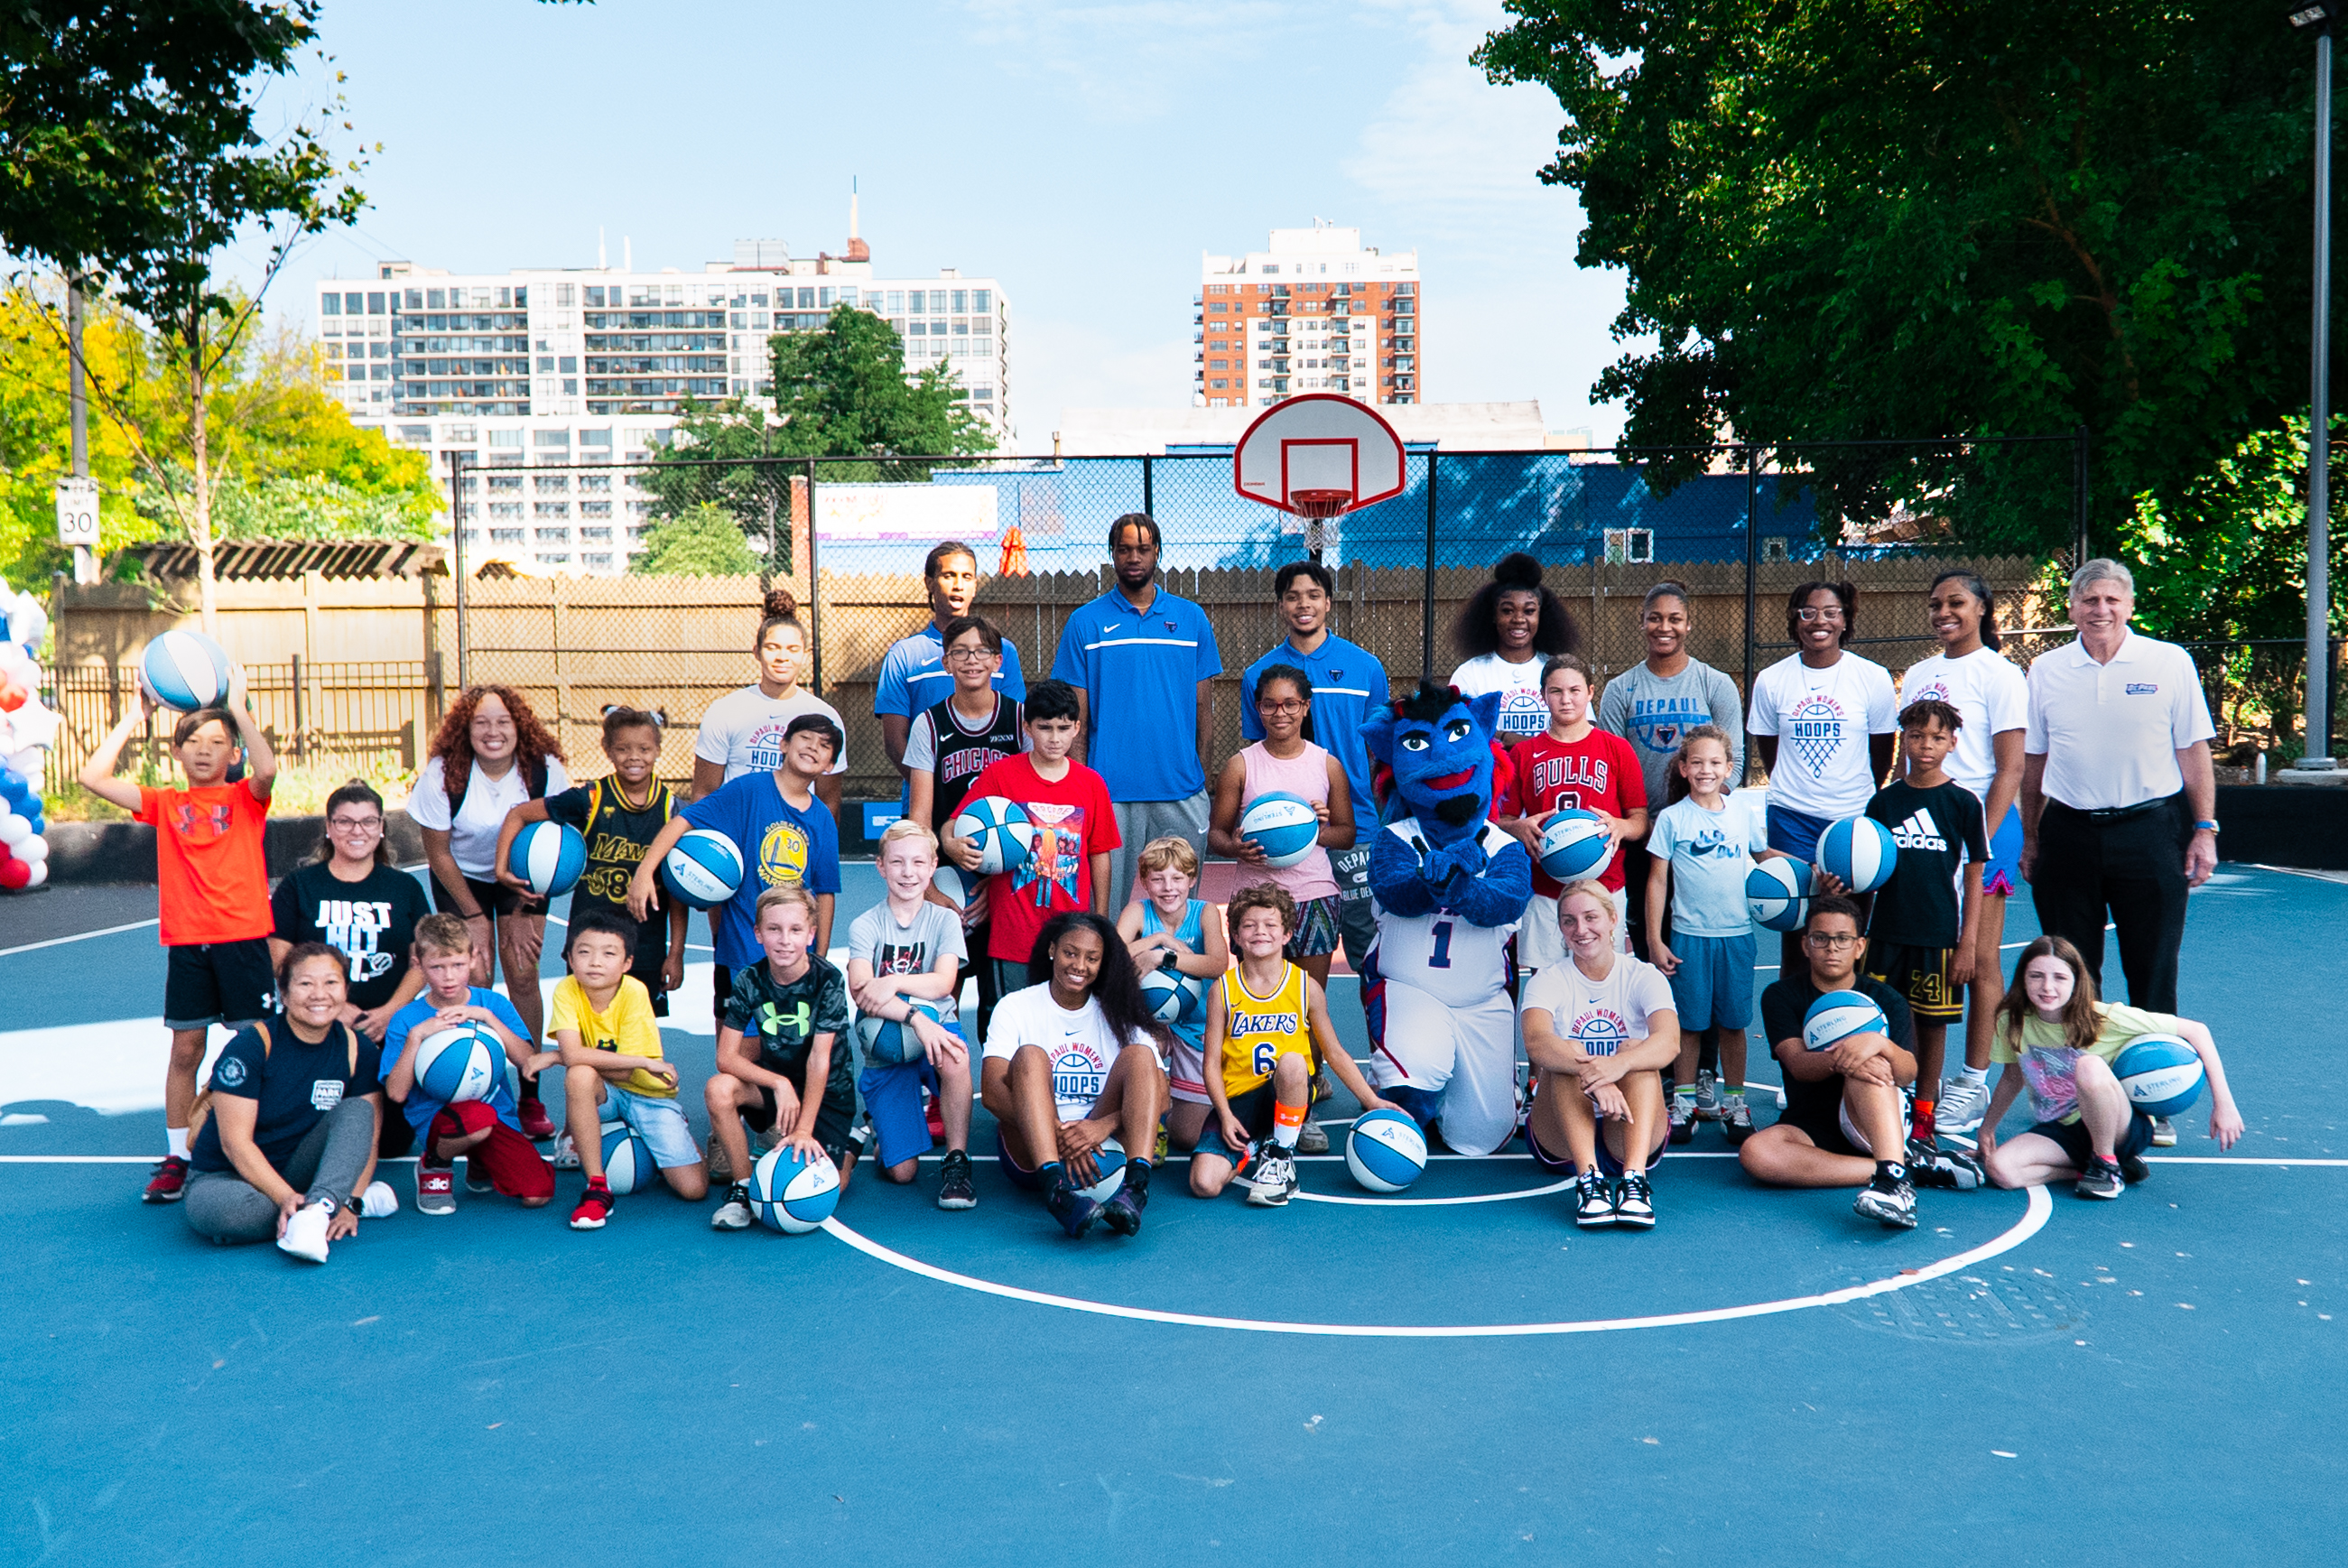 Blue Demons and Chicago community members gathered on a sunny Saturday to celebrate the renovation of the city's Margaret Hie Ding Lin Park, located at 1735 S. State St. (Image courtesy of Kassidy Brown)